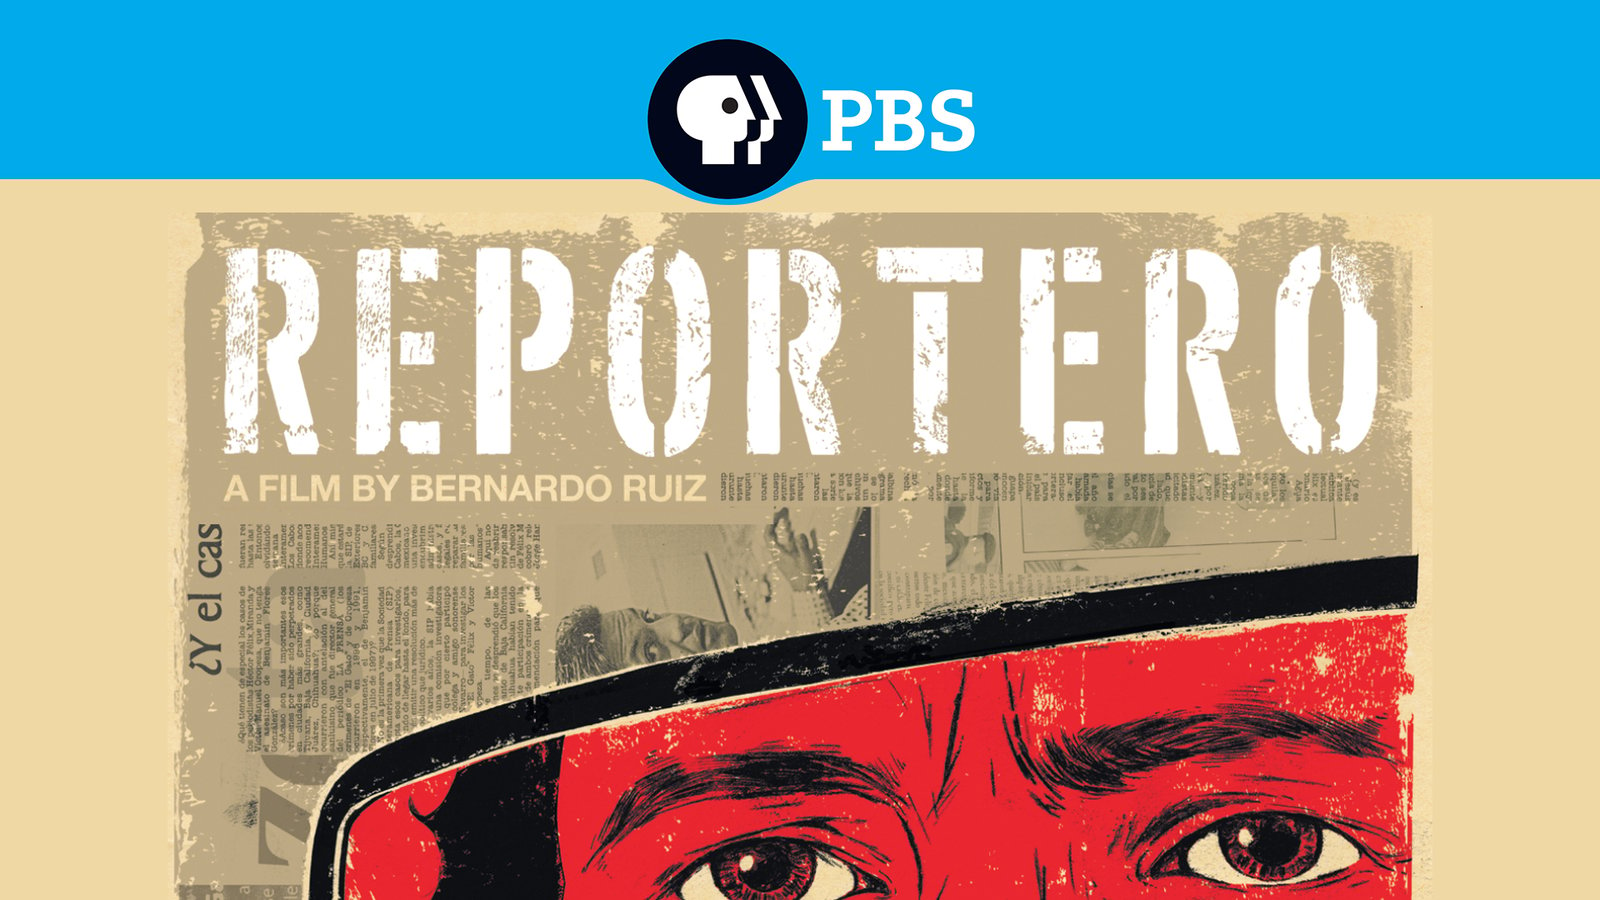 Reportero - Journalists Risking their Lives to Report on the Mexican Drug War